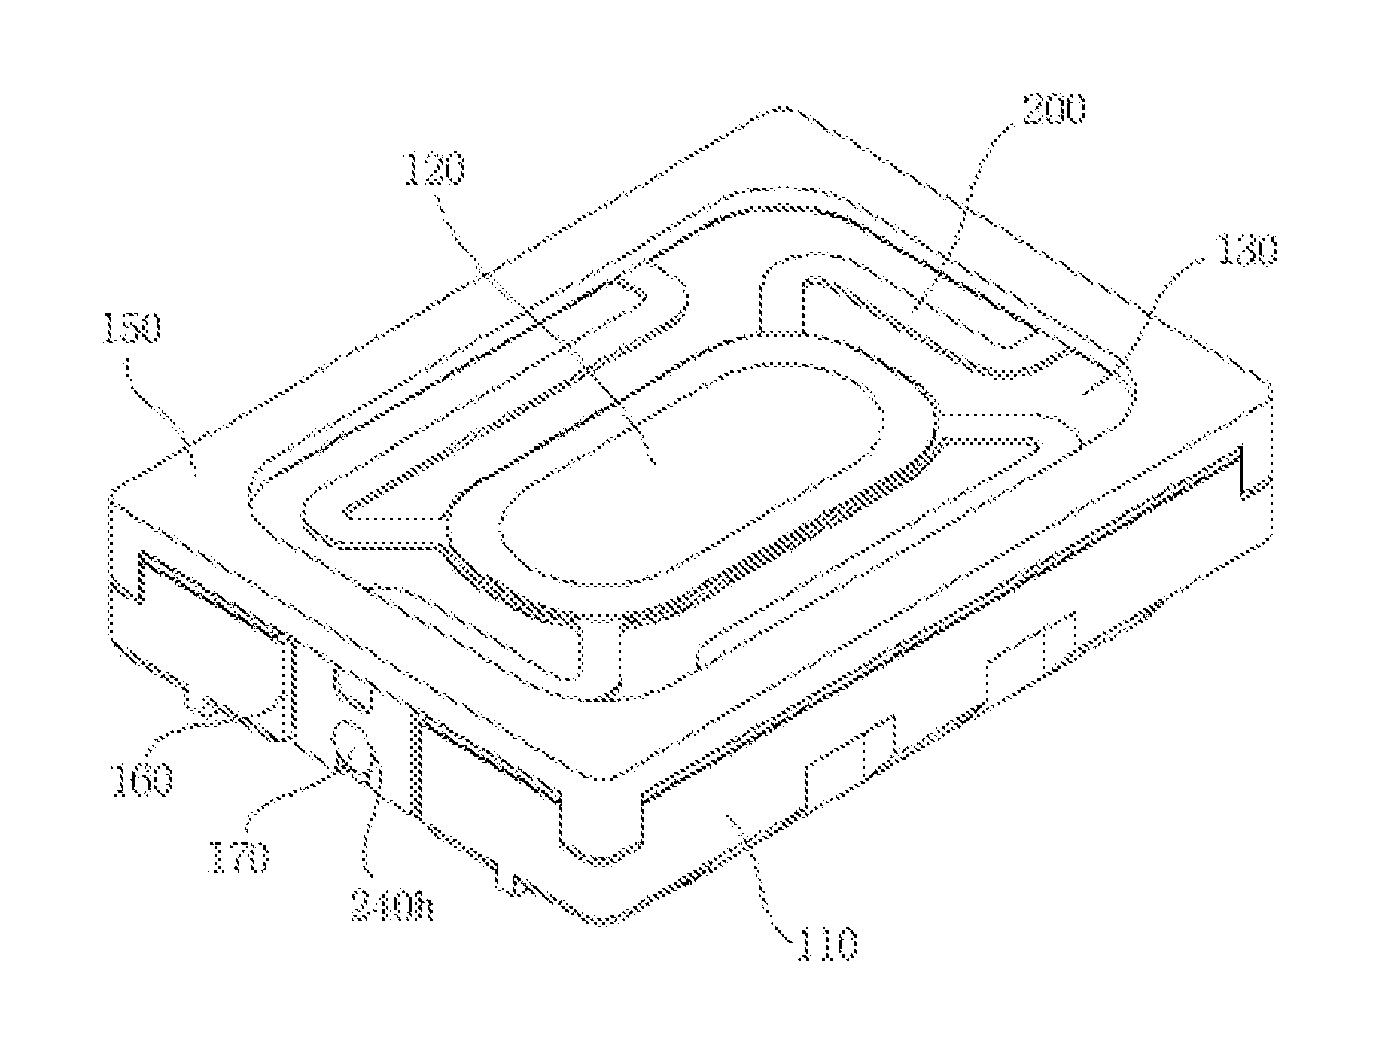 Acoustic transducer device